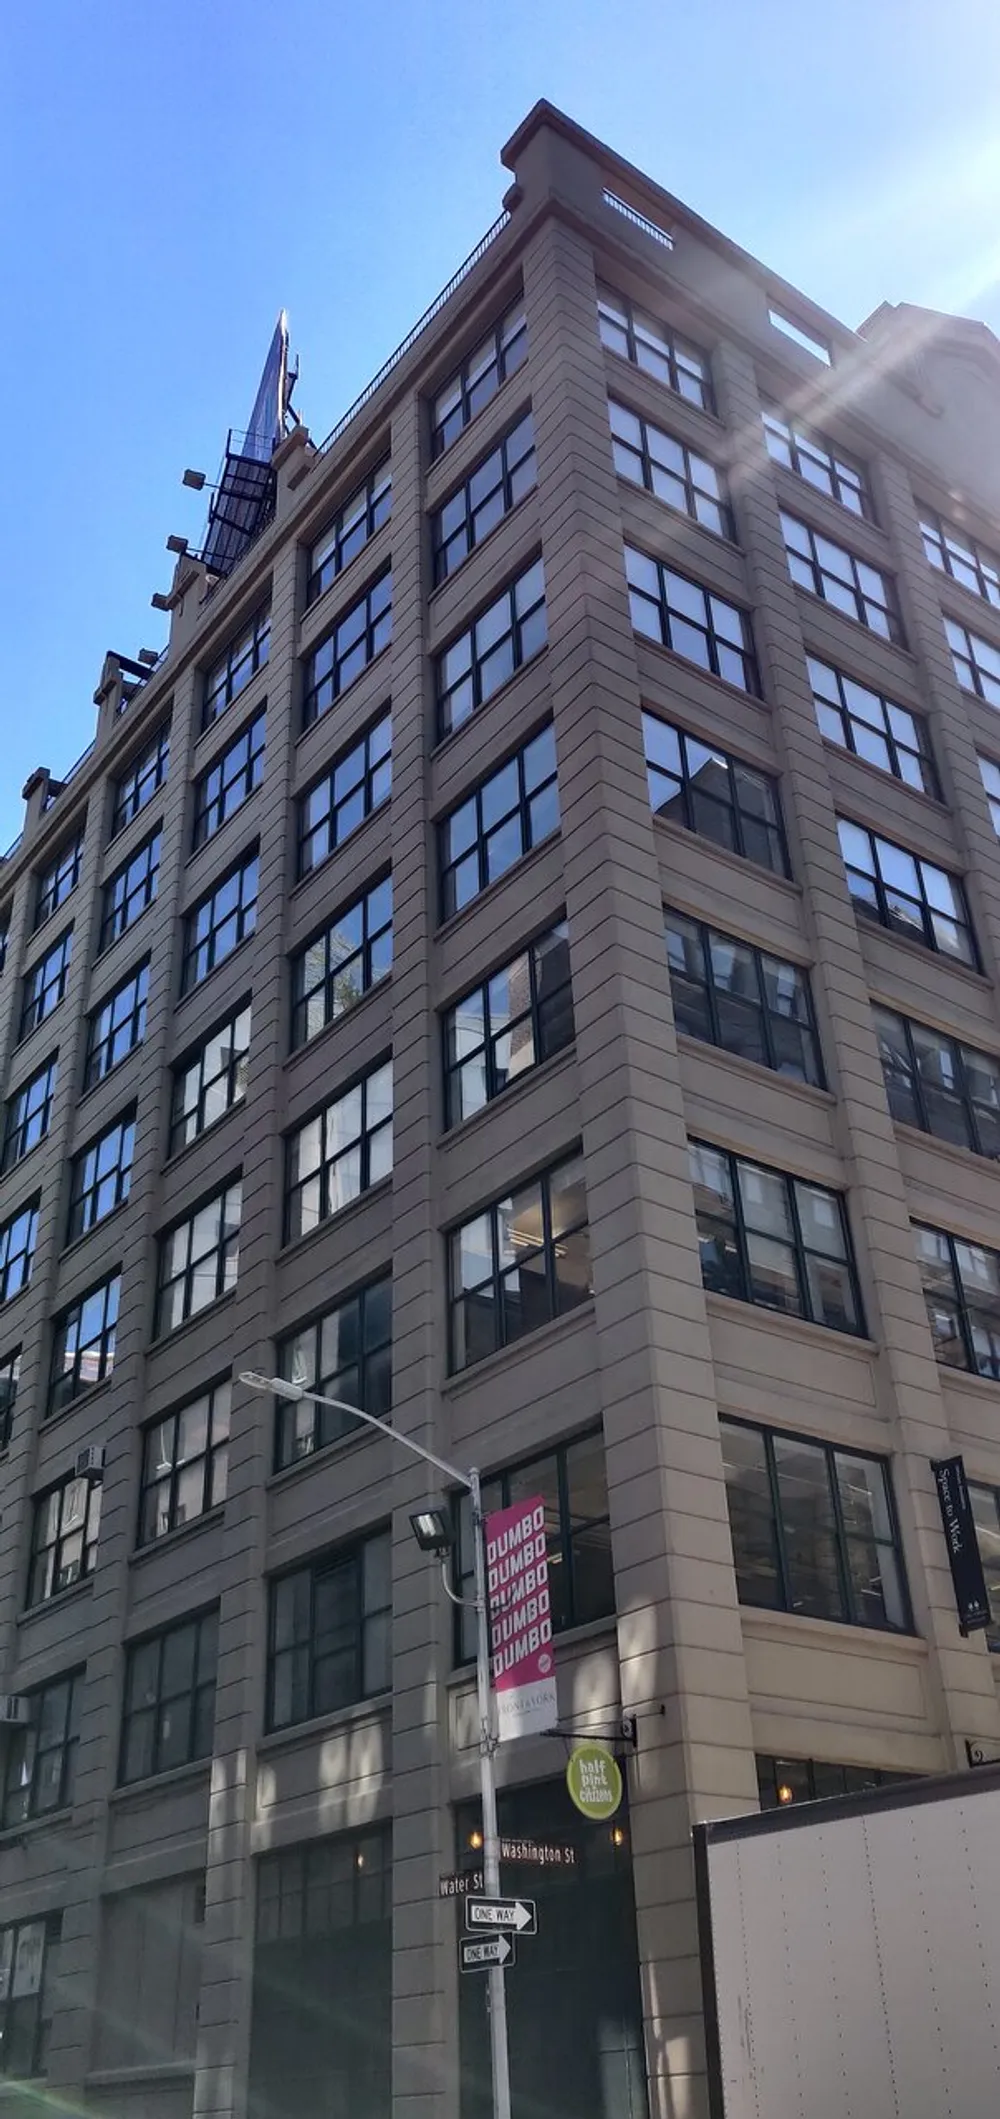 The image shows a multi-story building with a large banner reading DUMBO on its facade located at the corner of Water St and Washington St under a clear blue sky